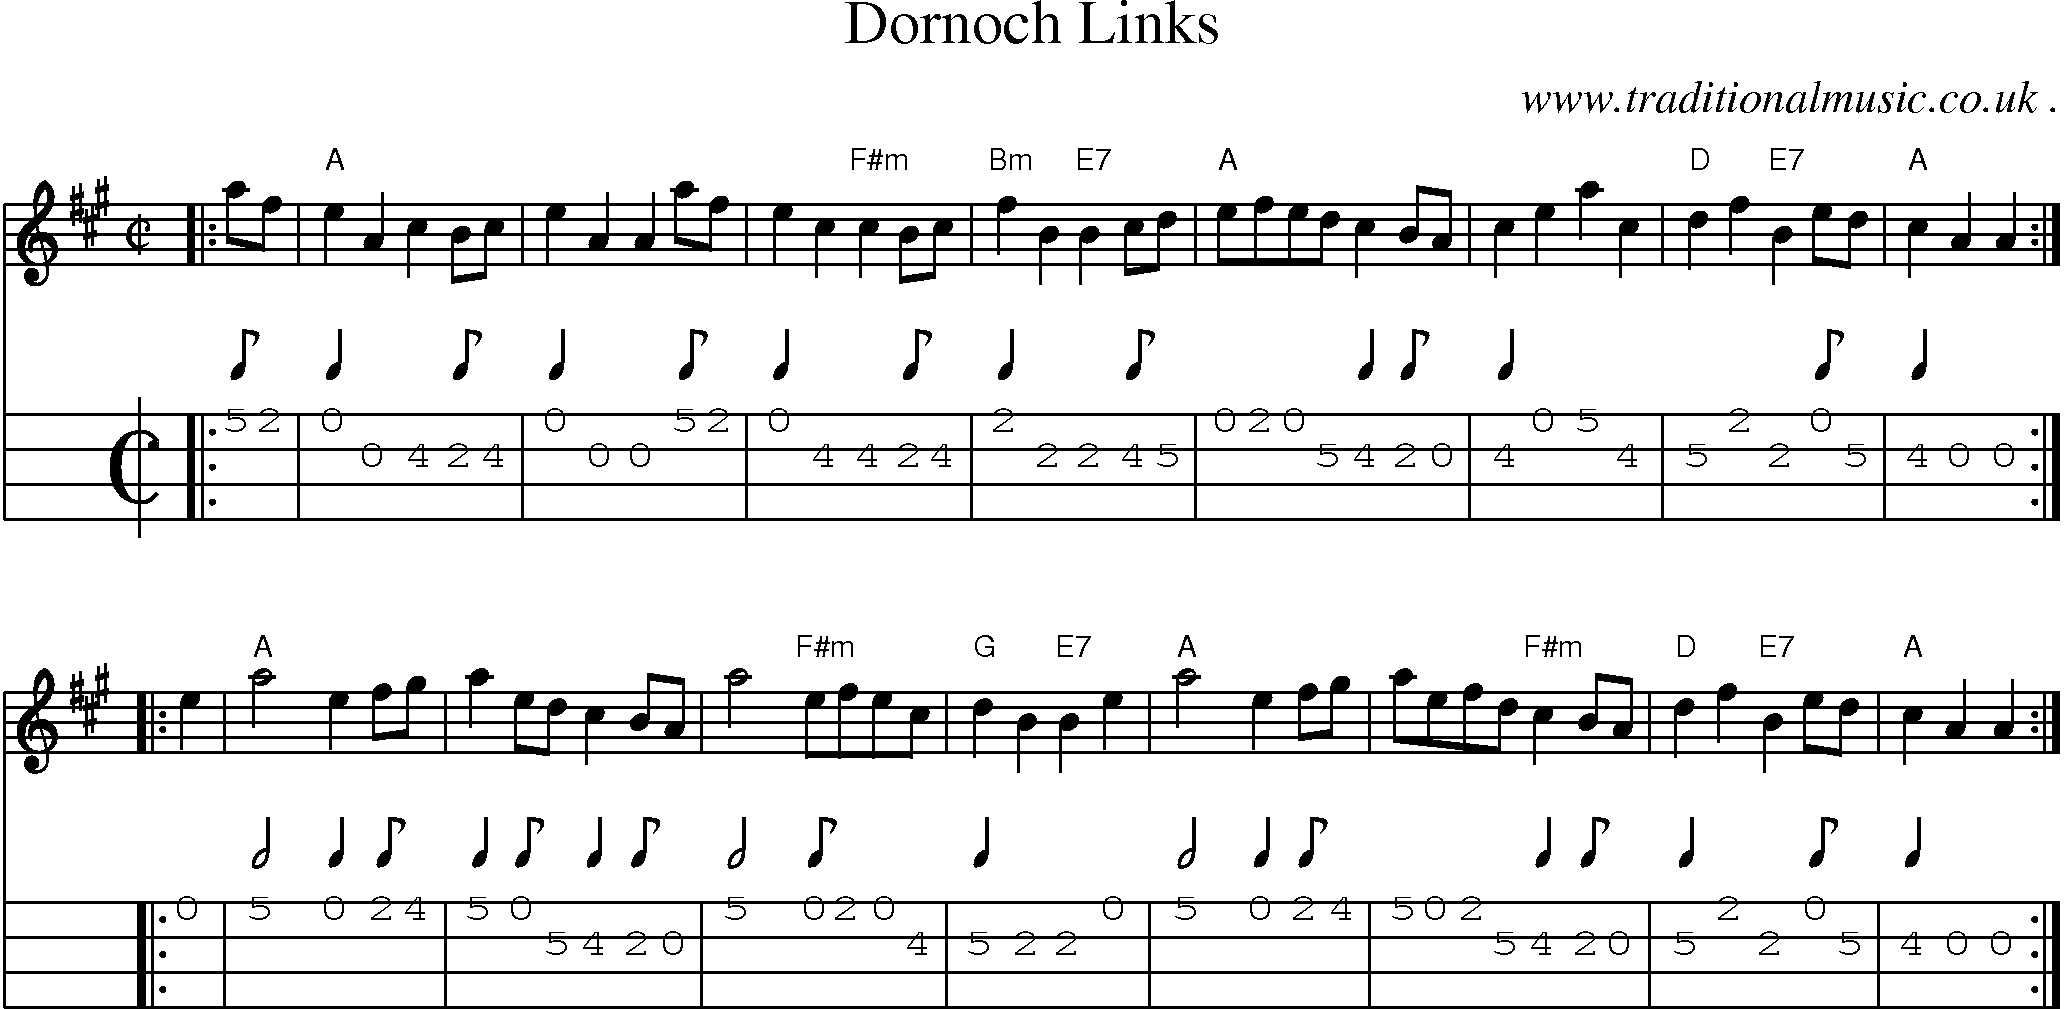 Sheet-music  score, Chords and Mandolin Tabs for Dornoch Links